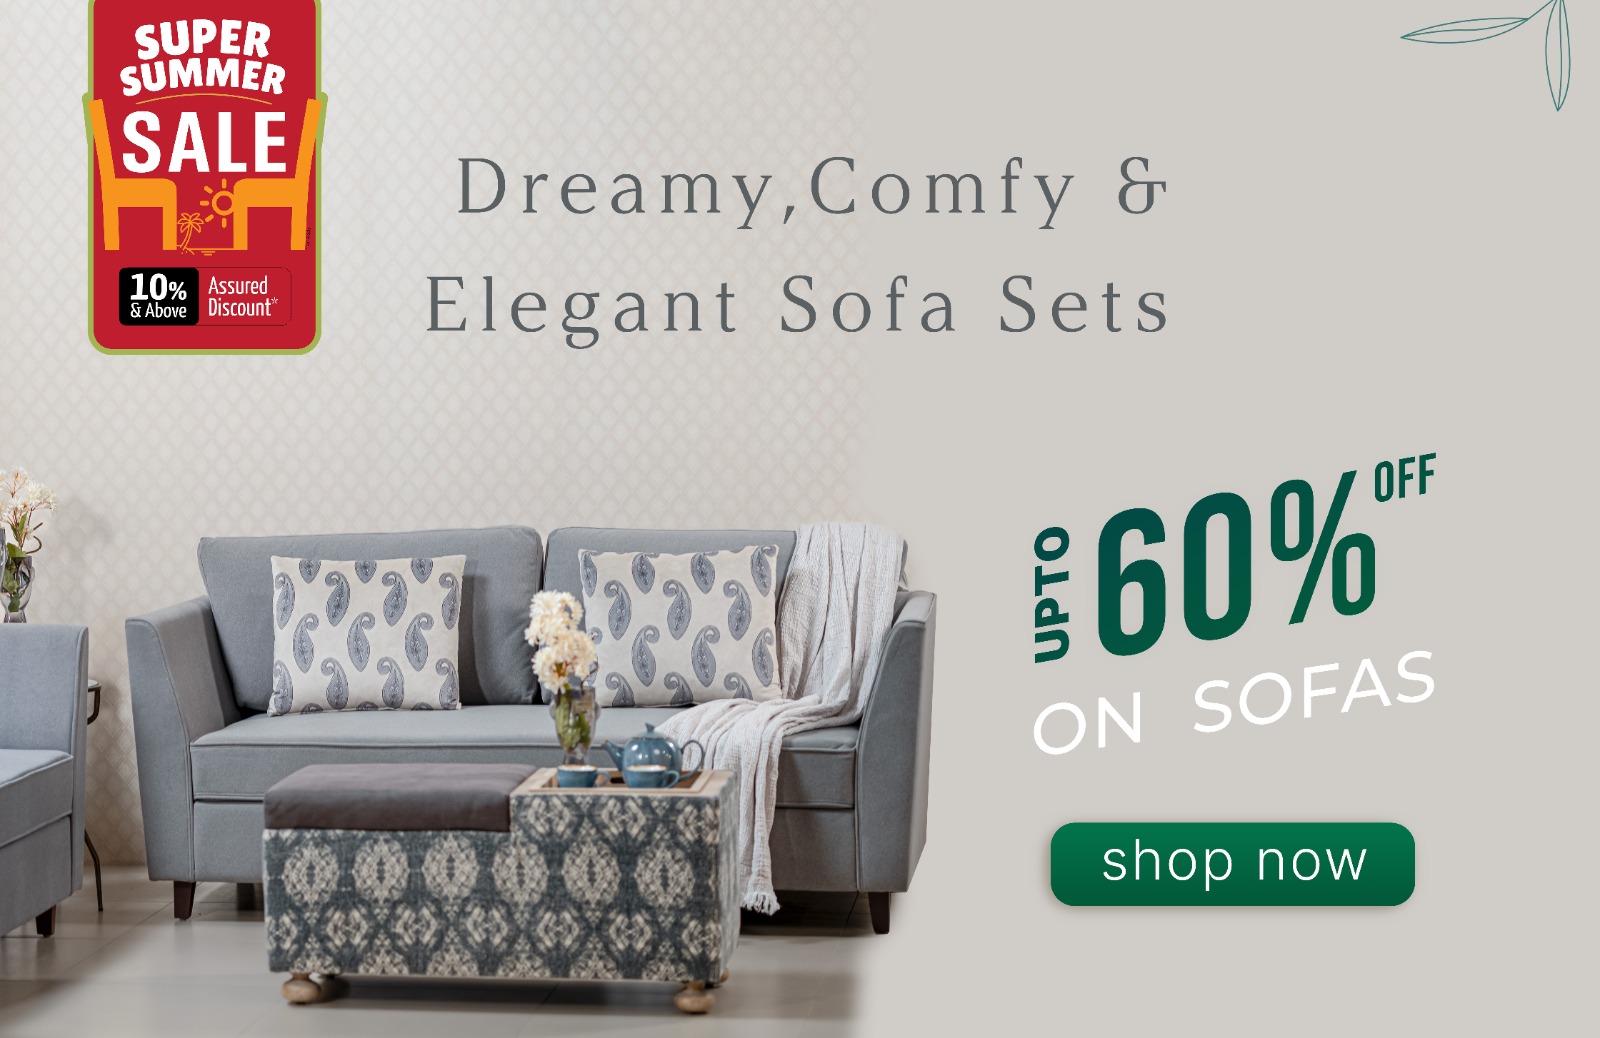 Sofas starting from 29899